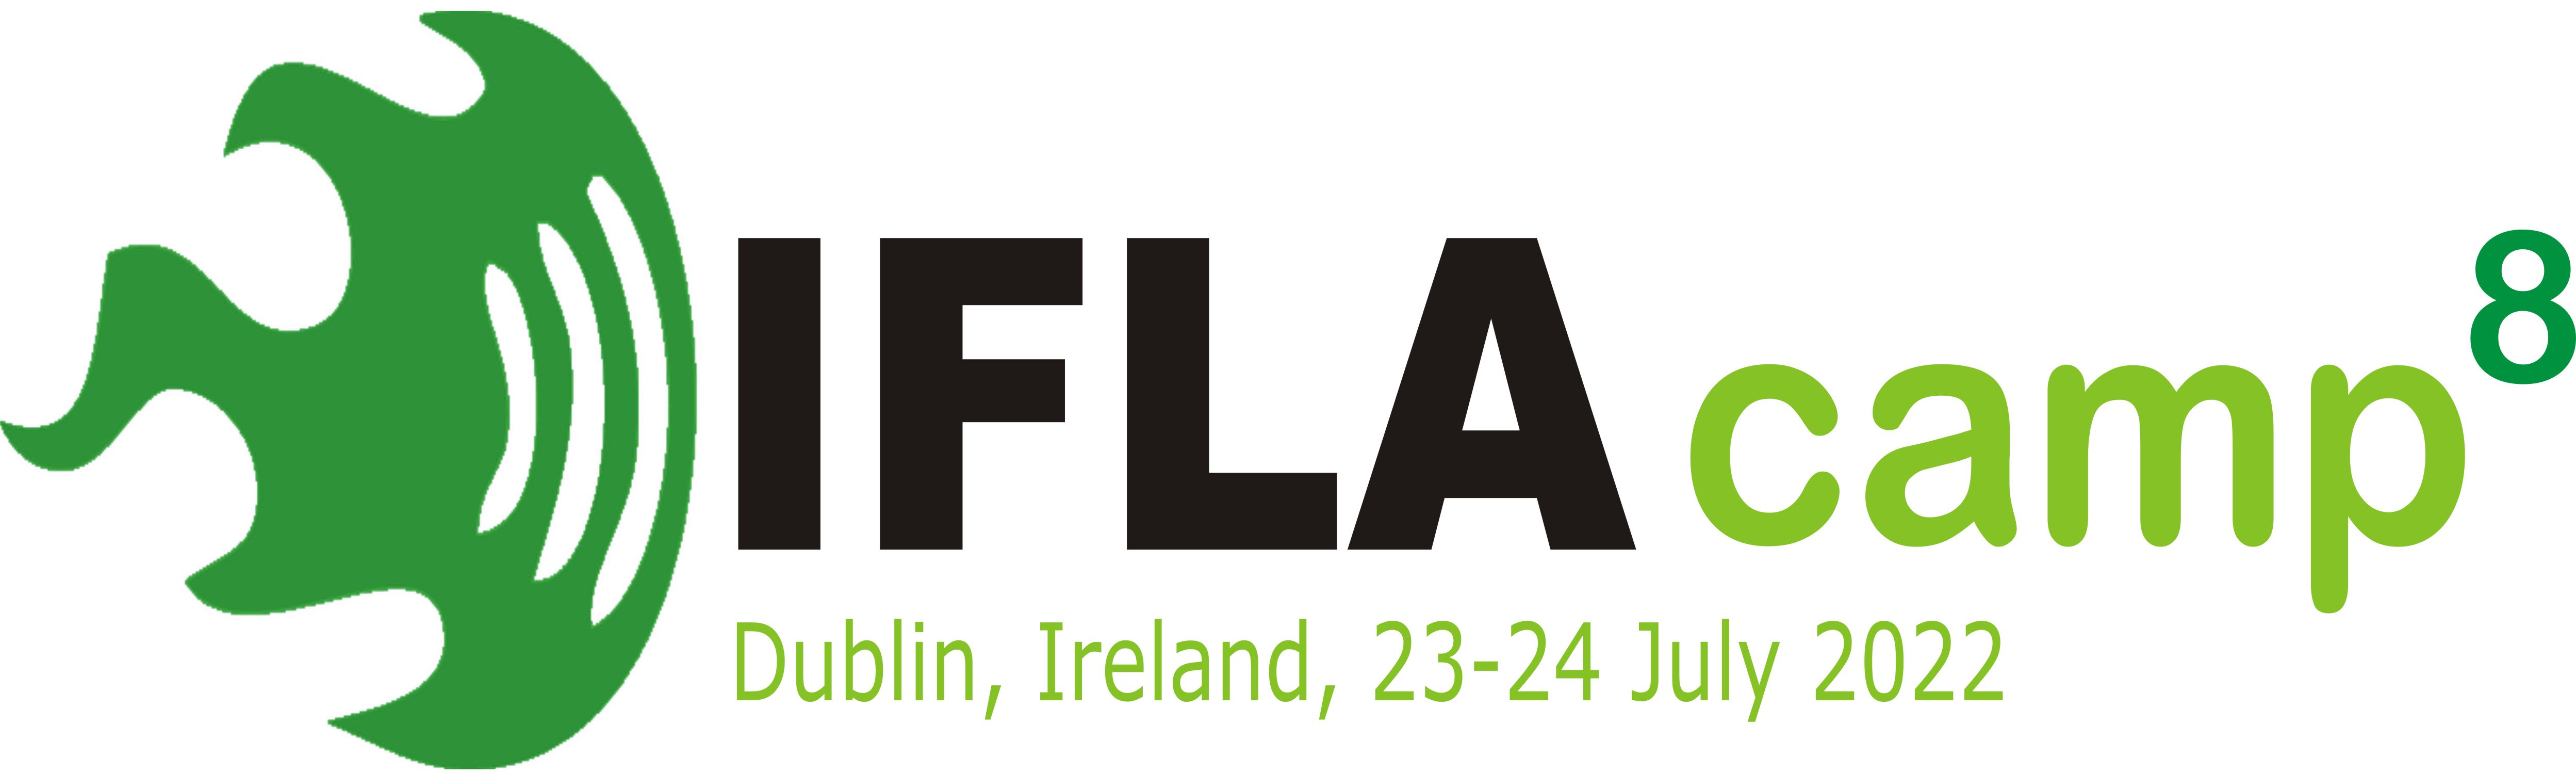 IFLAcamp is an event organized by IFLA NPSIG